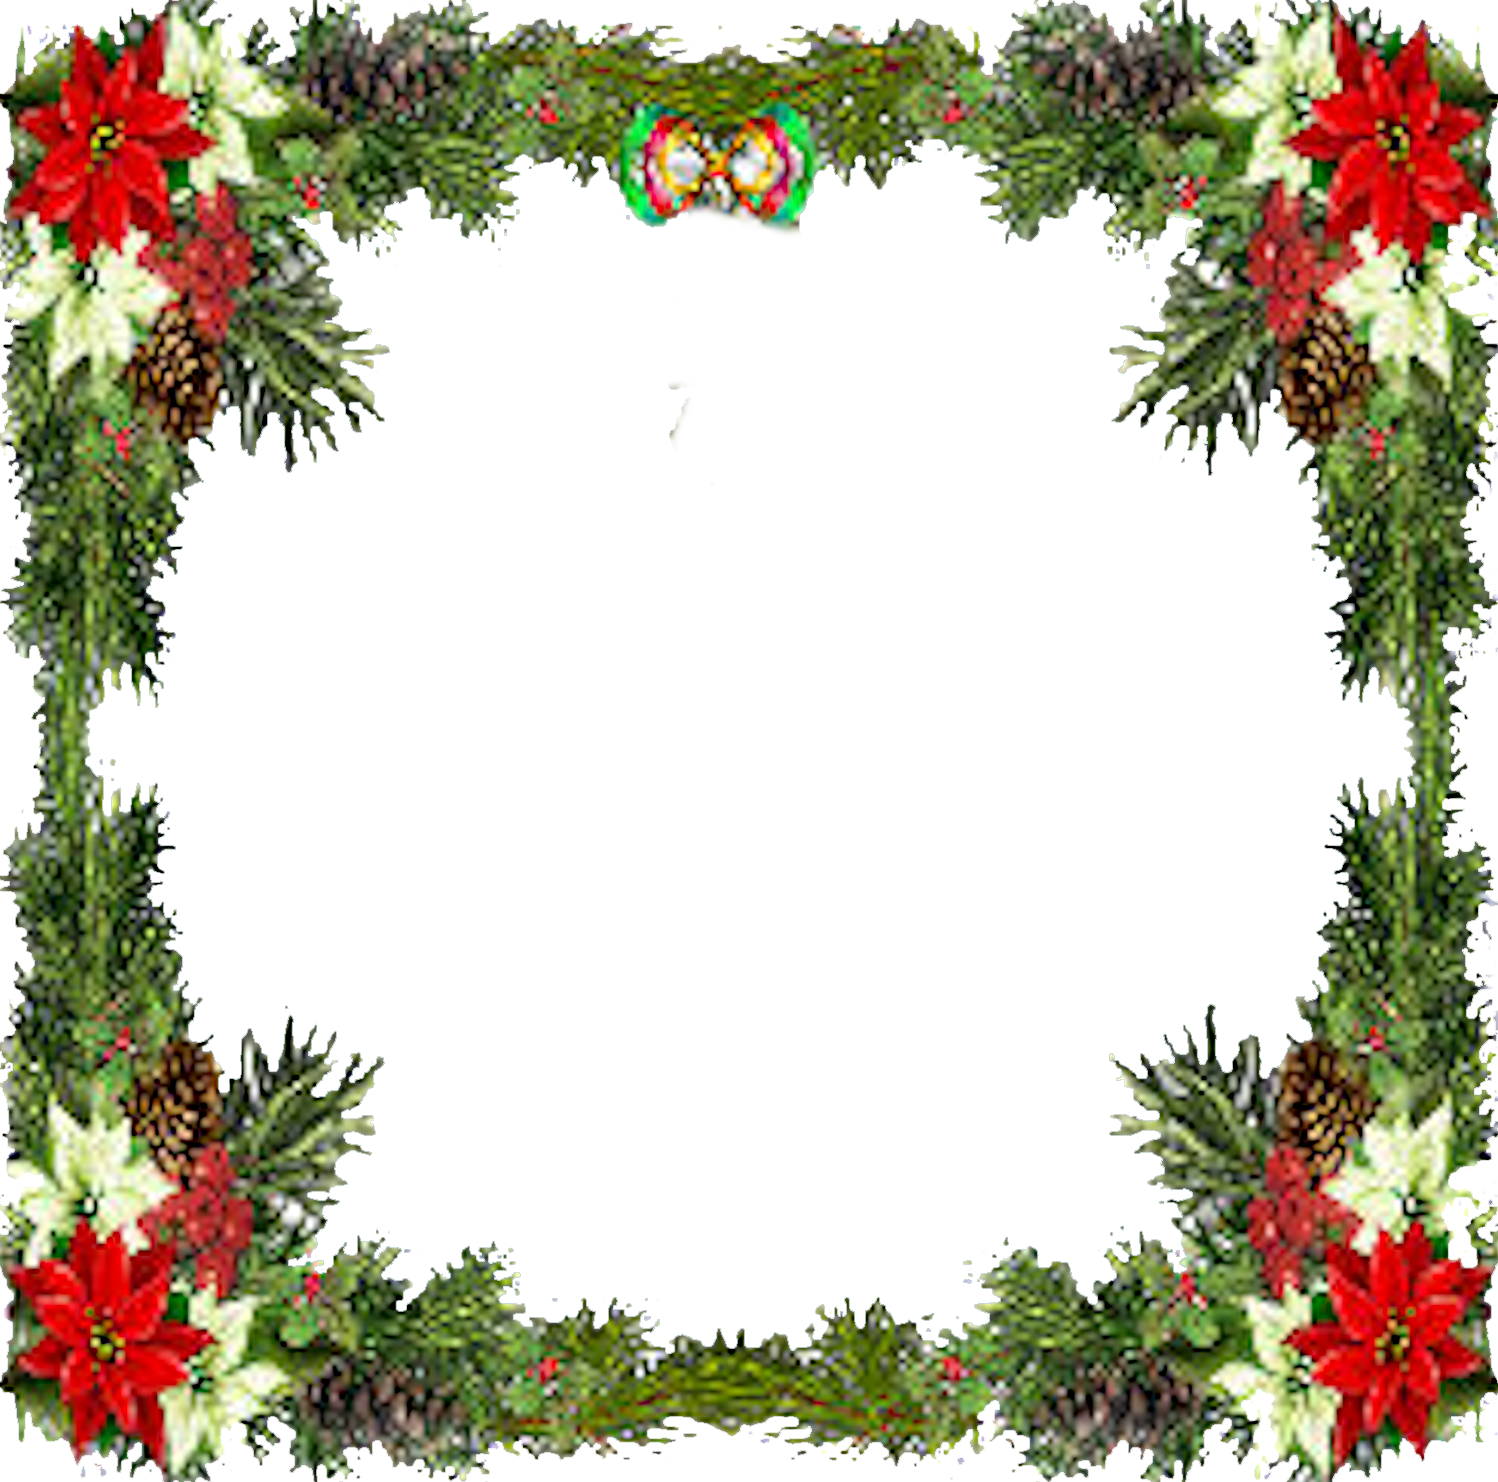 Xmas Frame Png - Free Icons and PNG Backgrounds - ClipArt Best